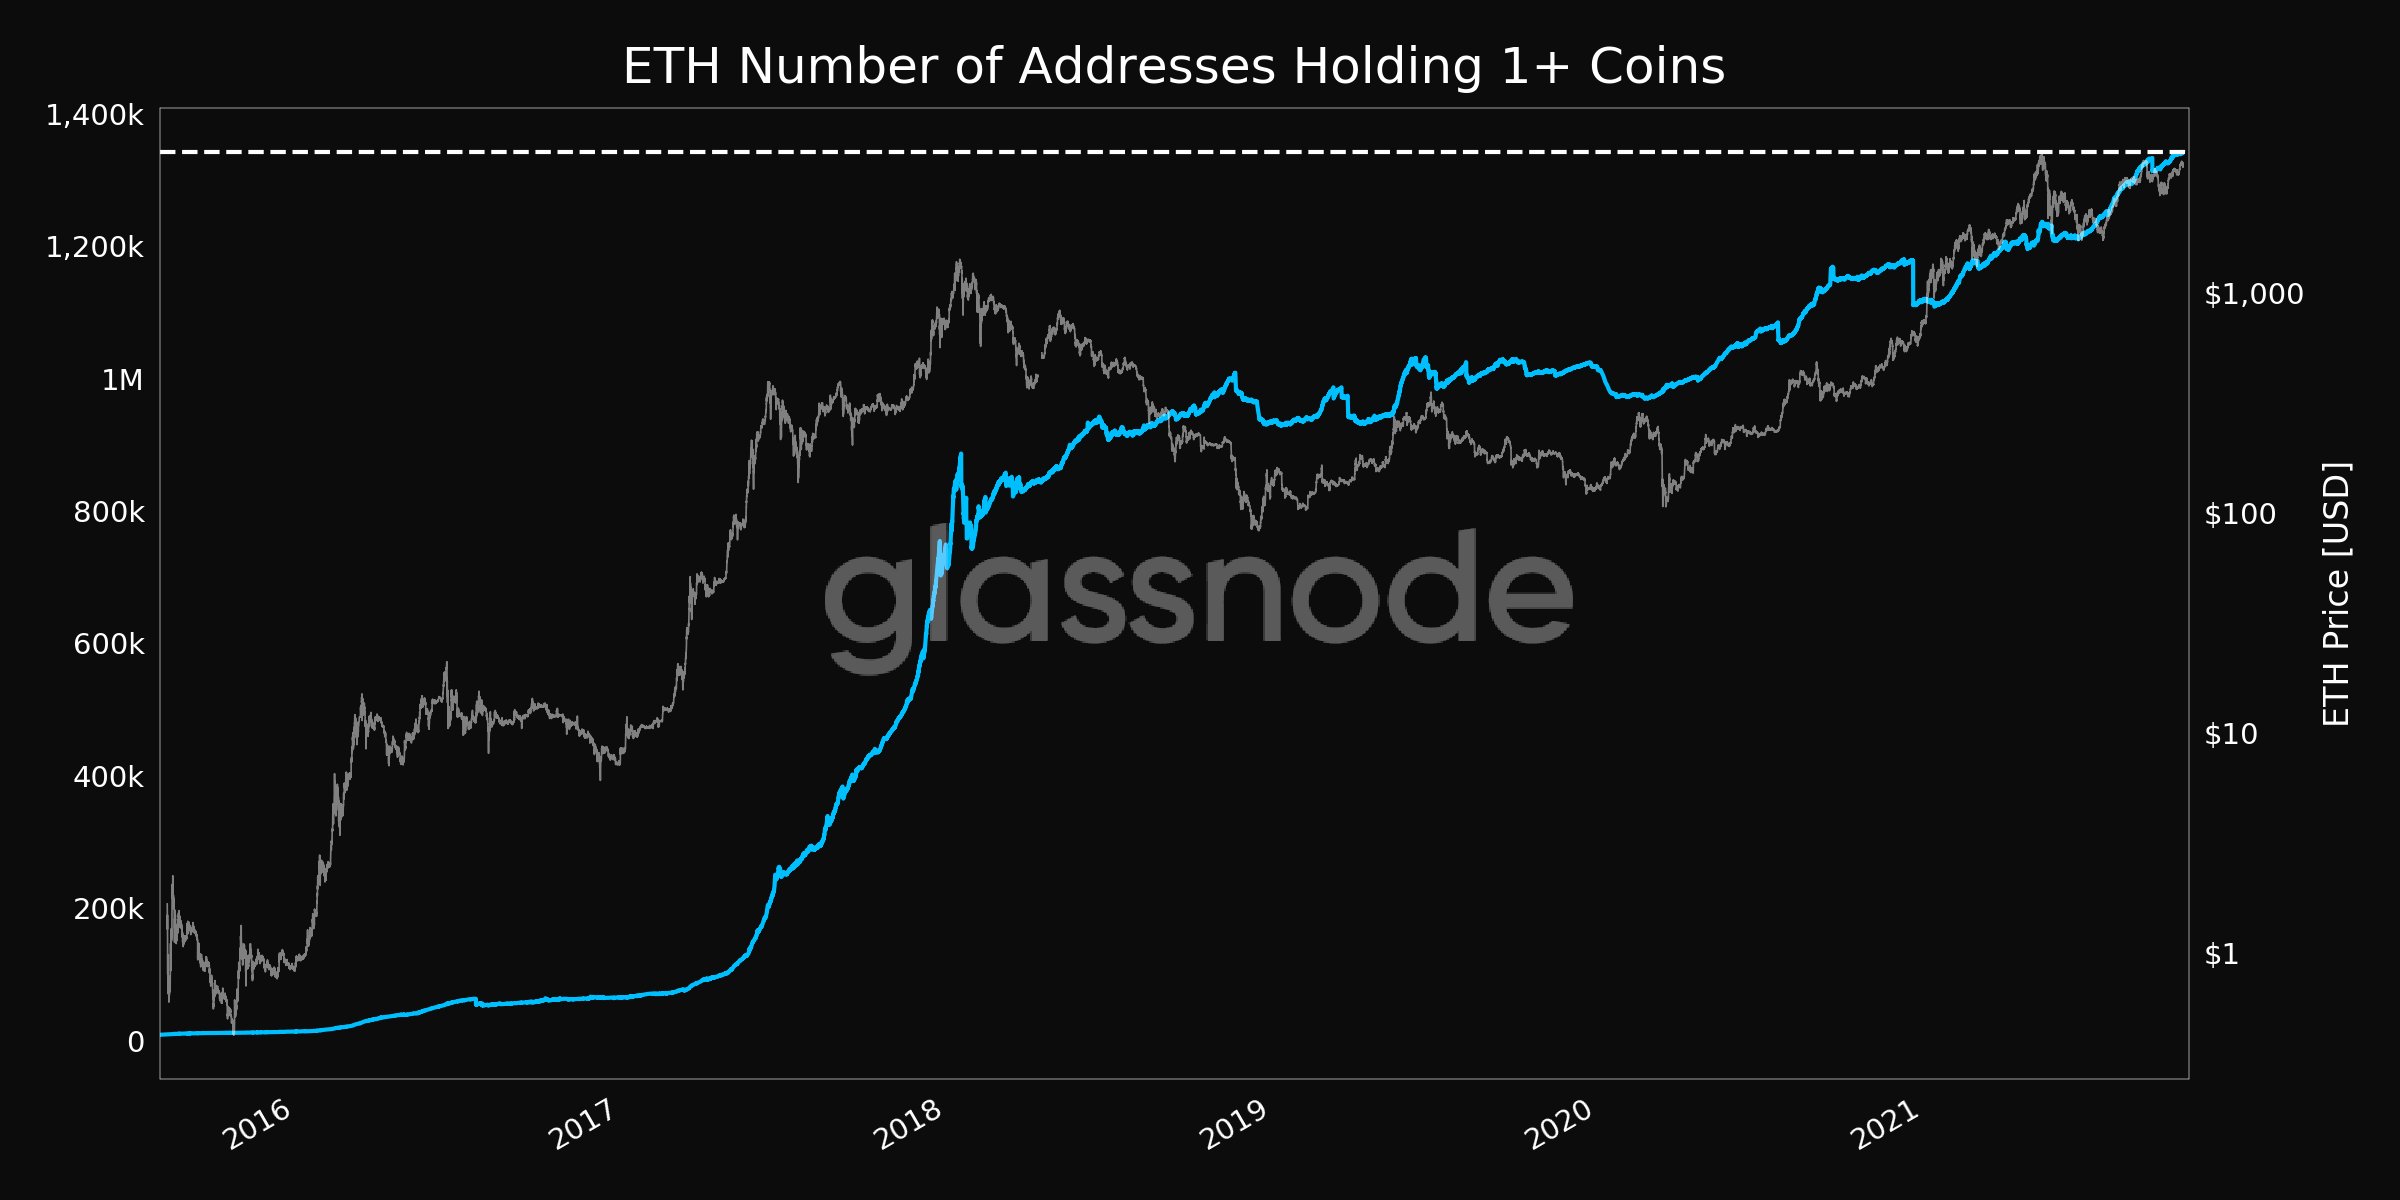  addresses high ethereum all-time eth accompanied rise 